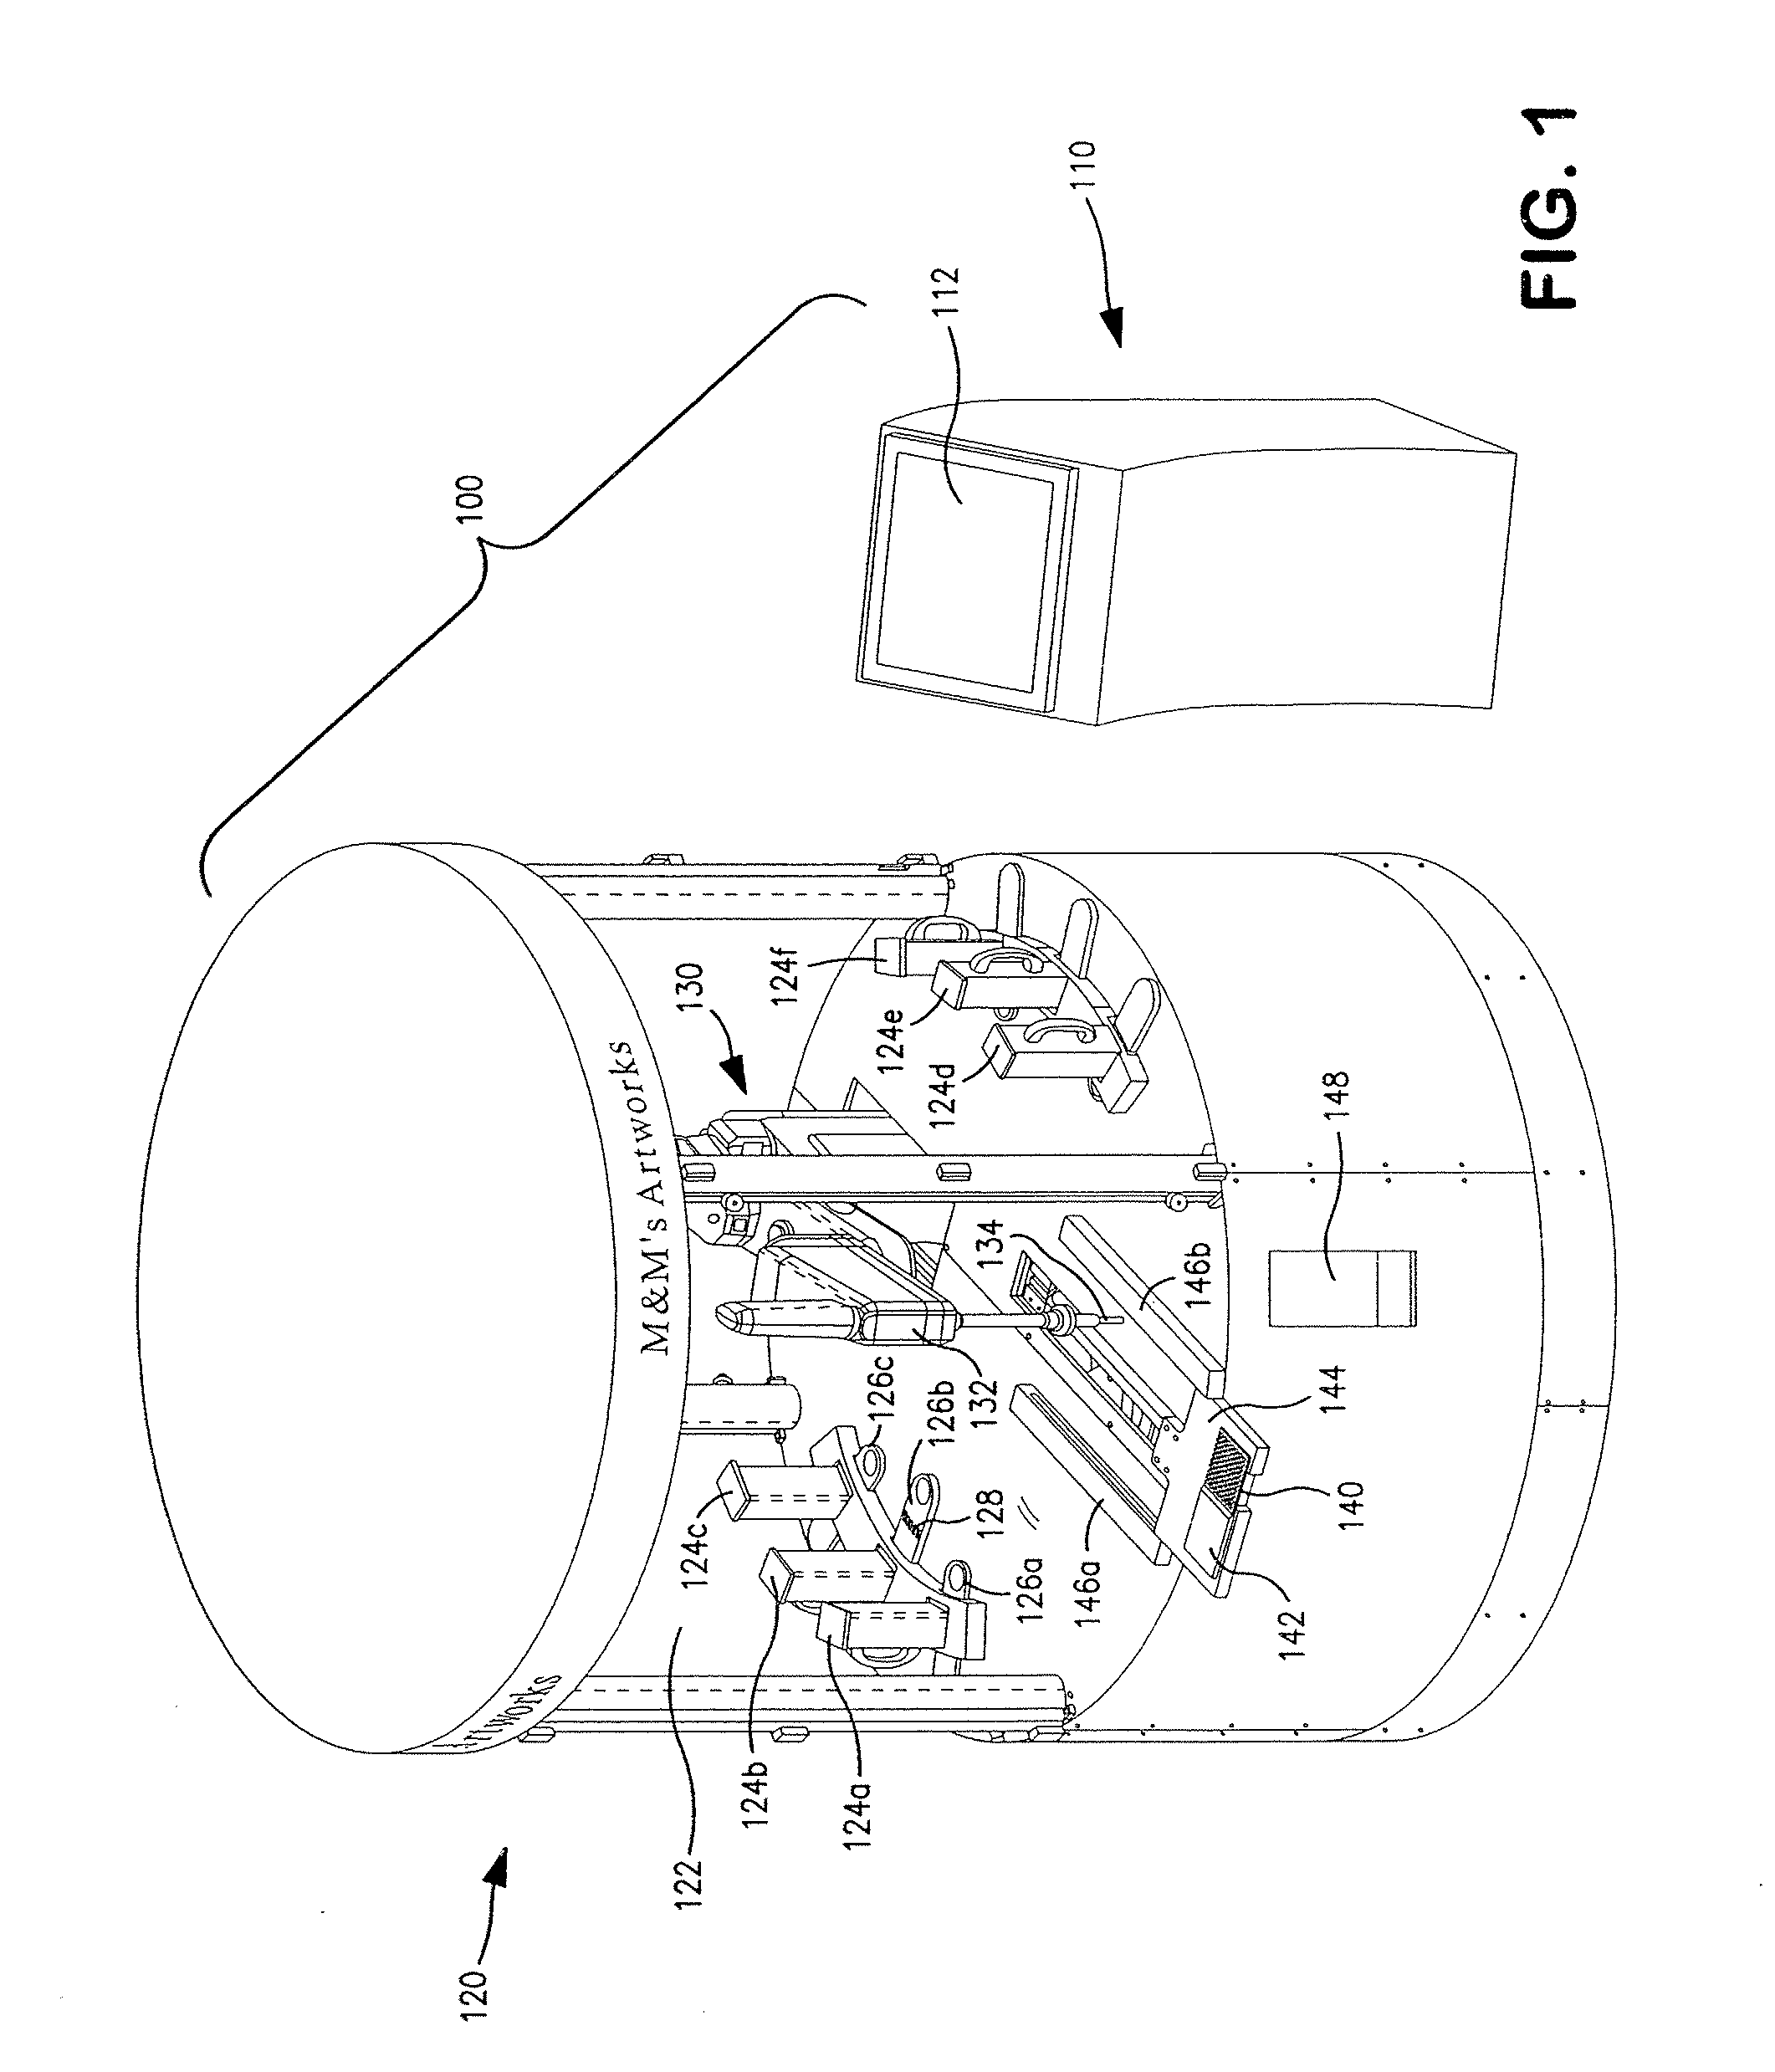 System and method for designing and producing confectionary arrangement